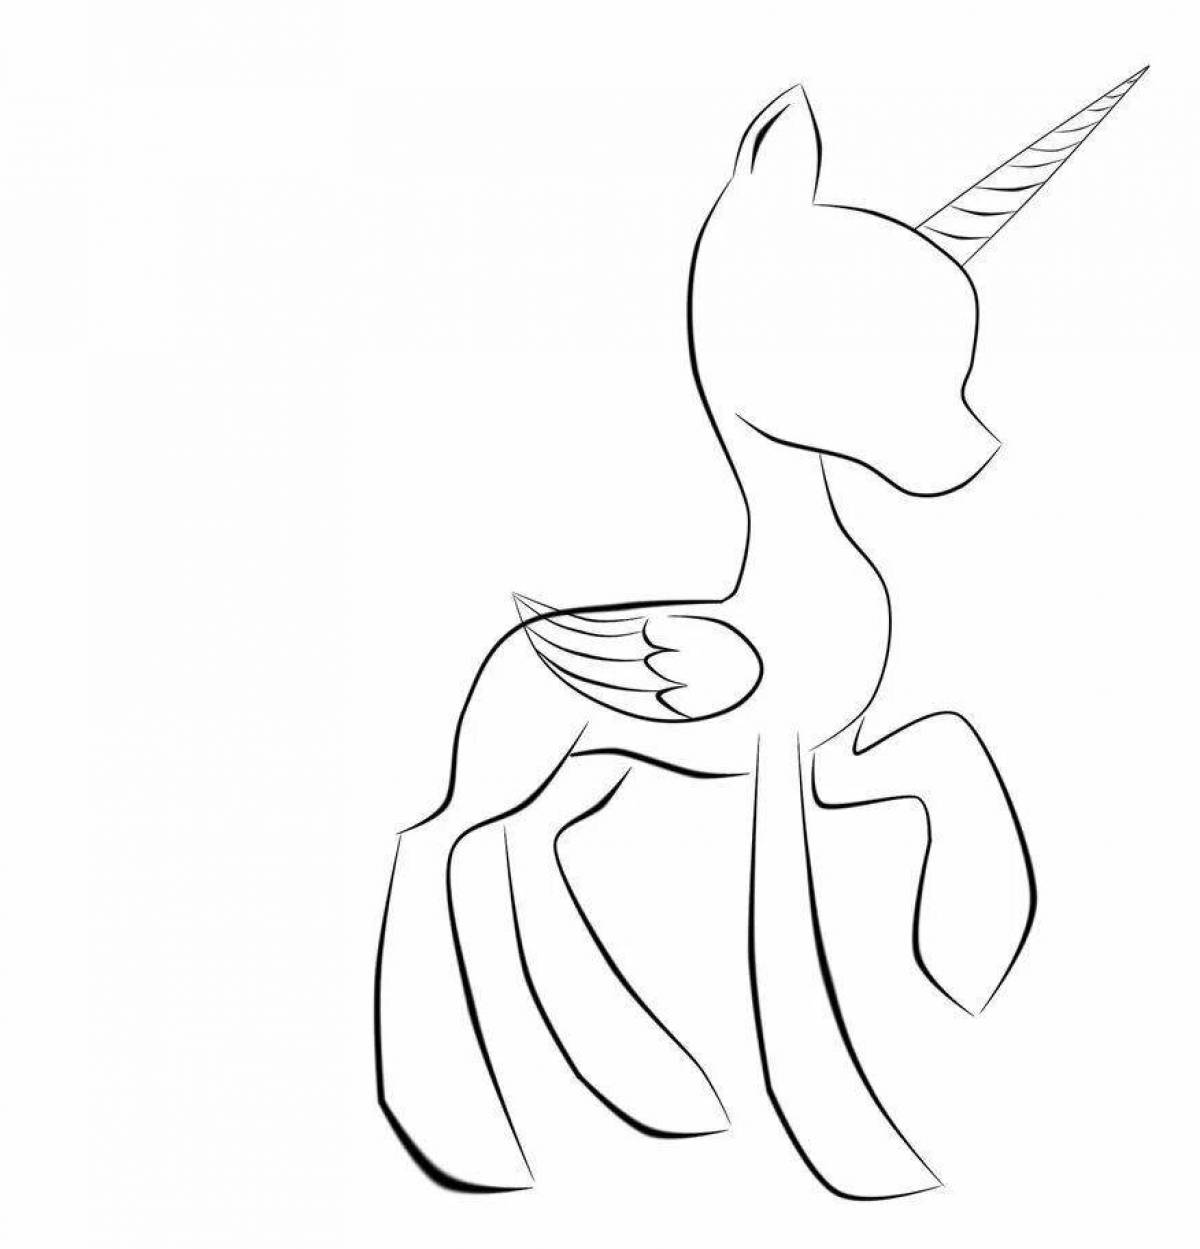 Coloring book funny pony mannequin